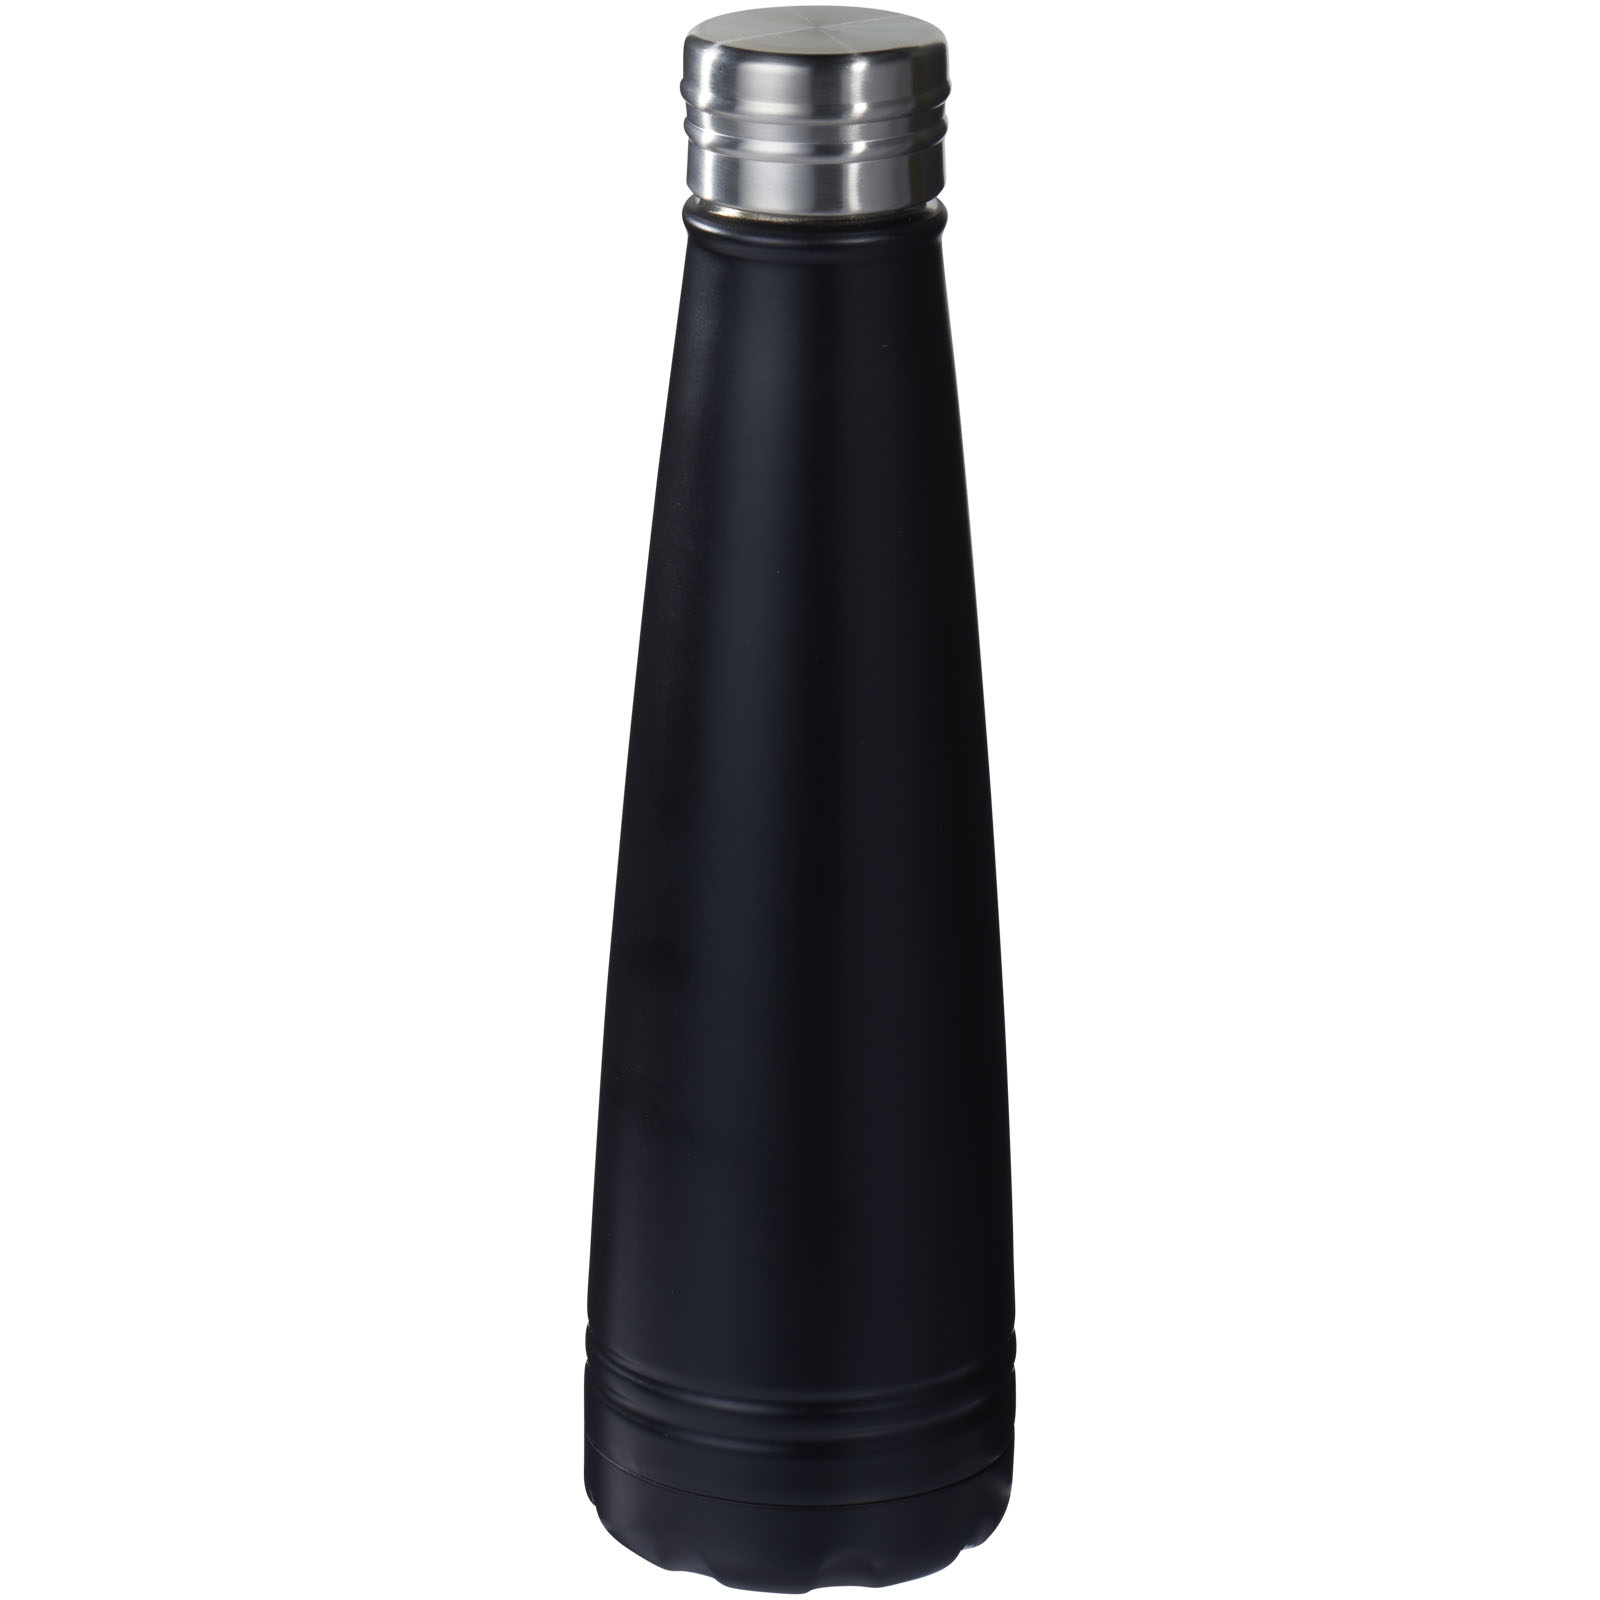 Stainless steel thermo bottle LIENEES, 500 ml